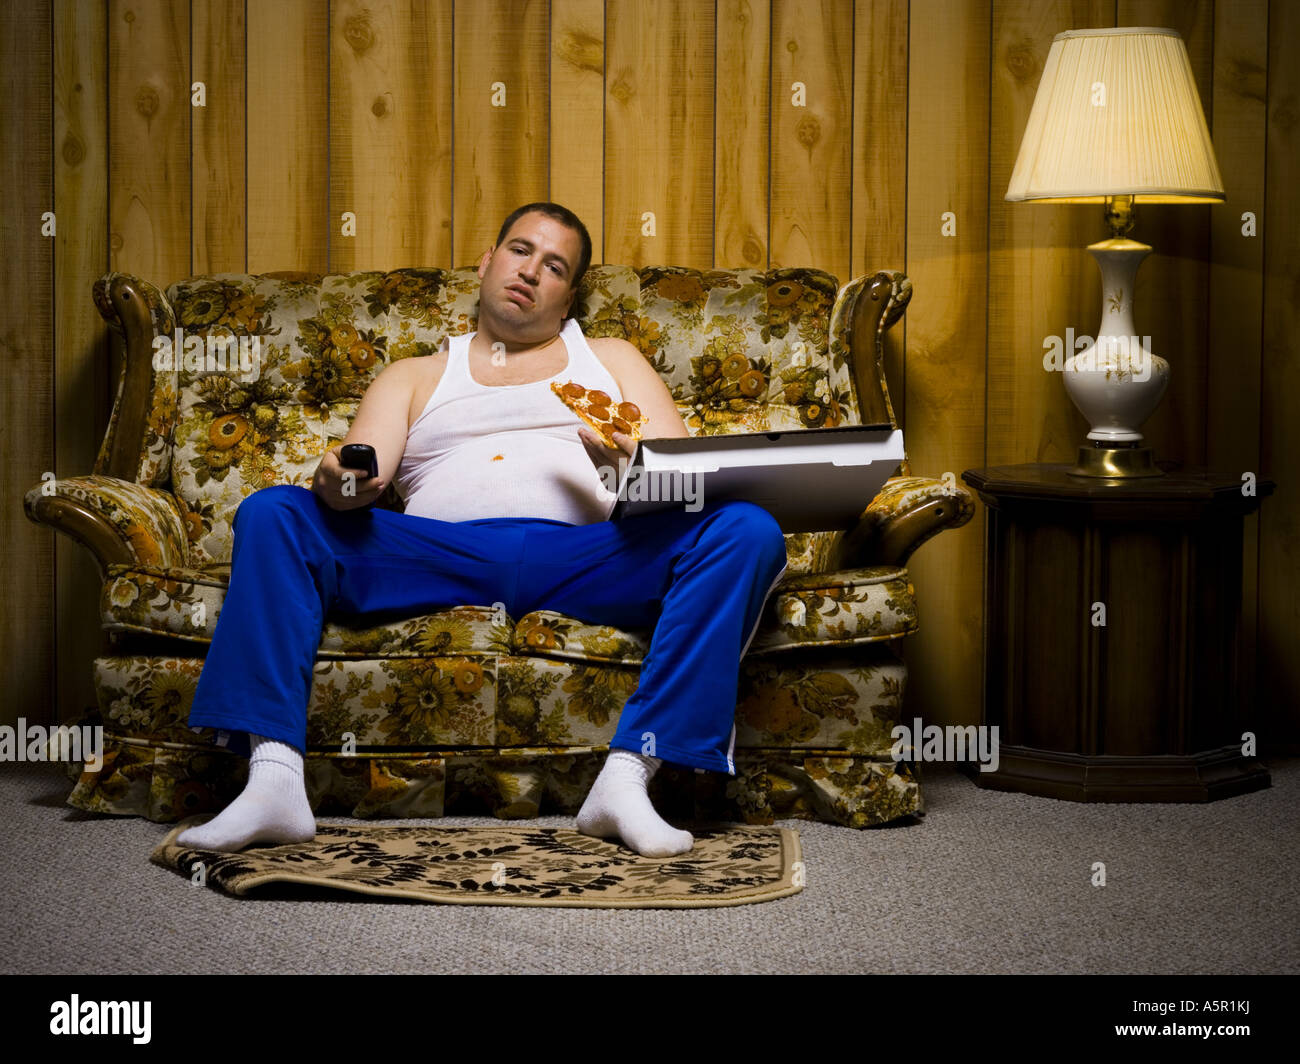 Man on sofa with pizza and TV remote Stock Photo